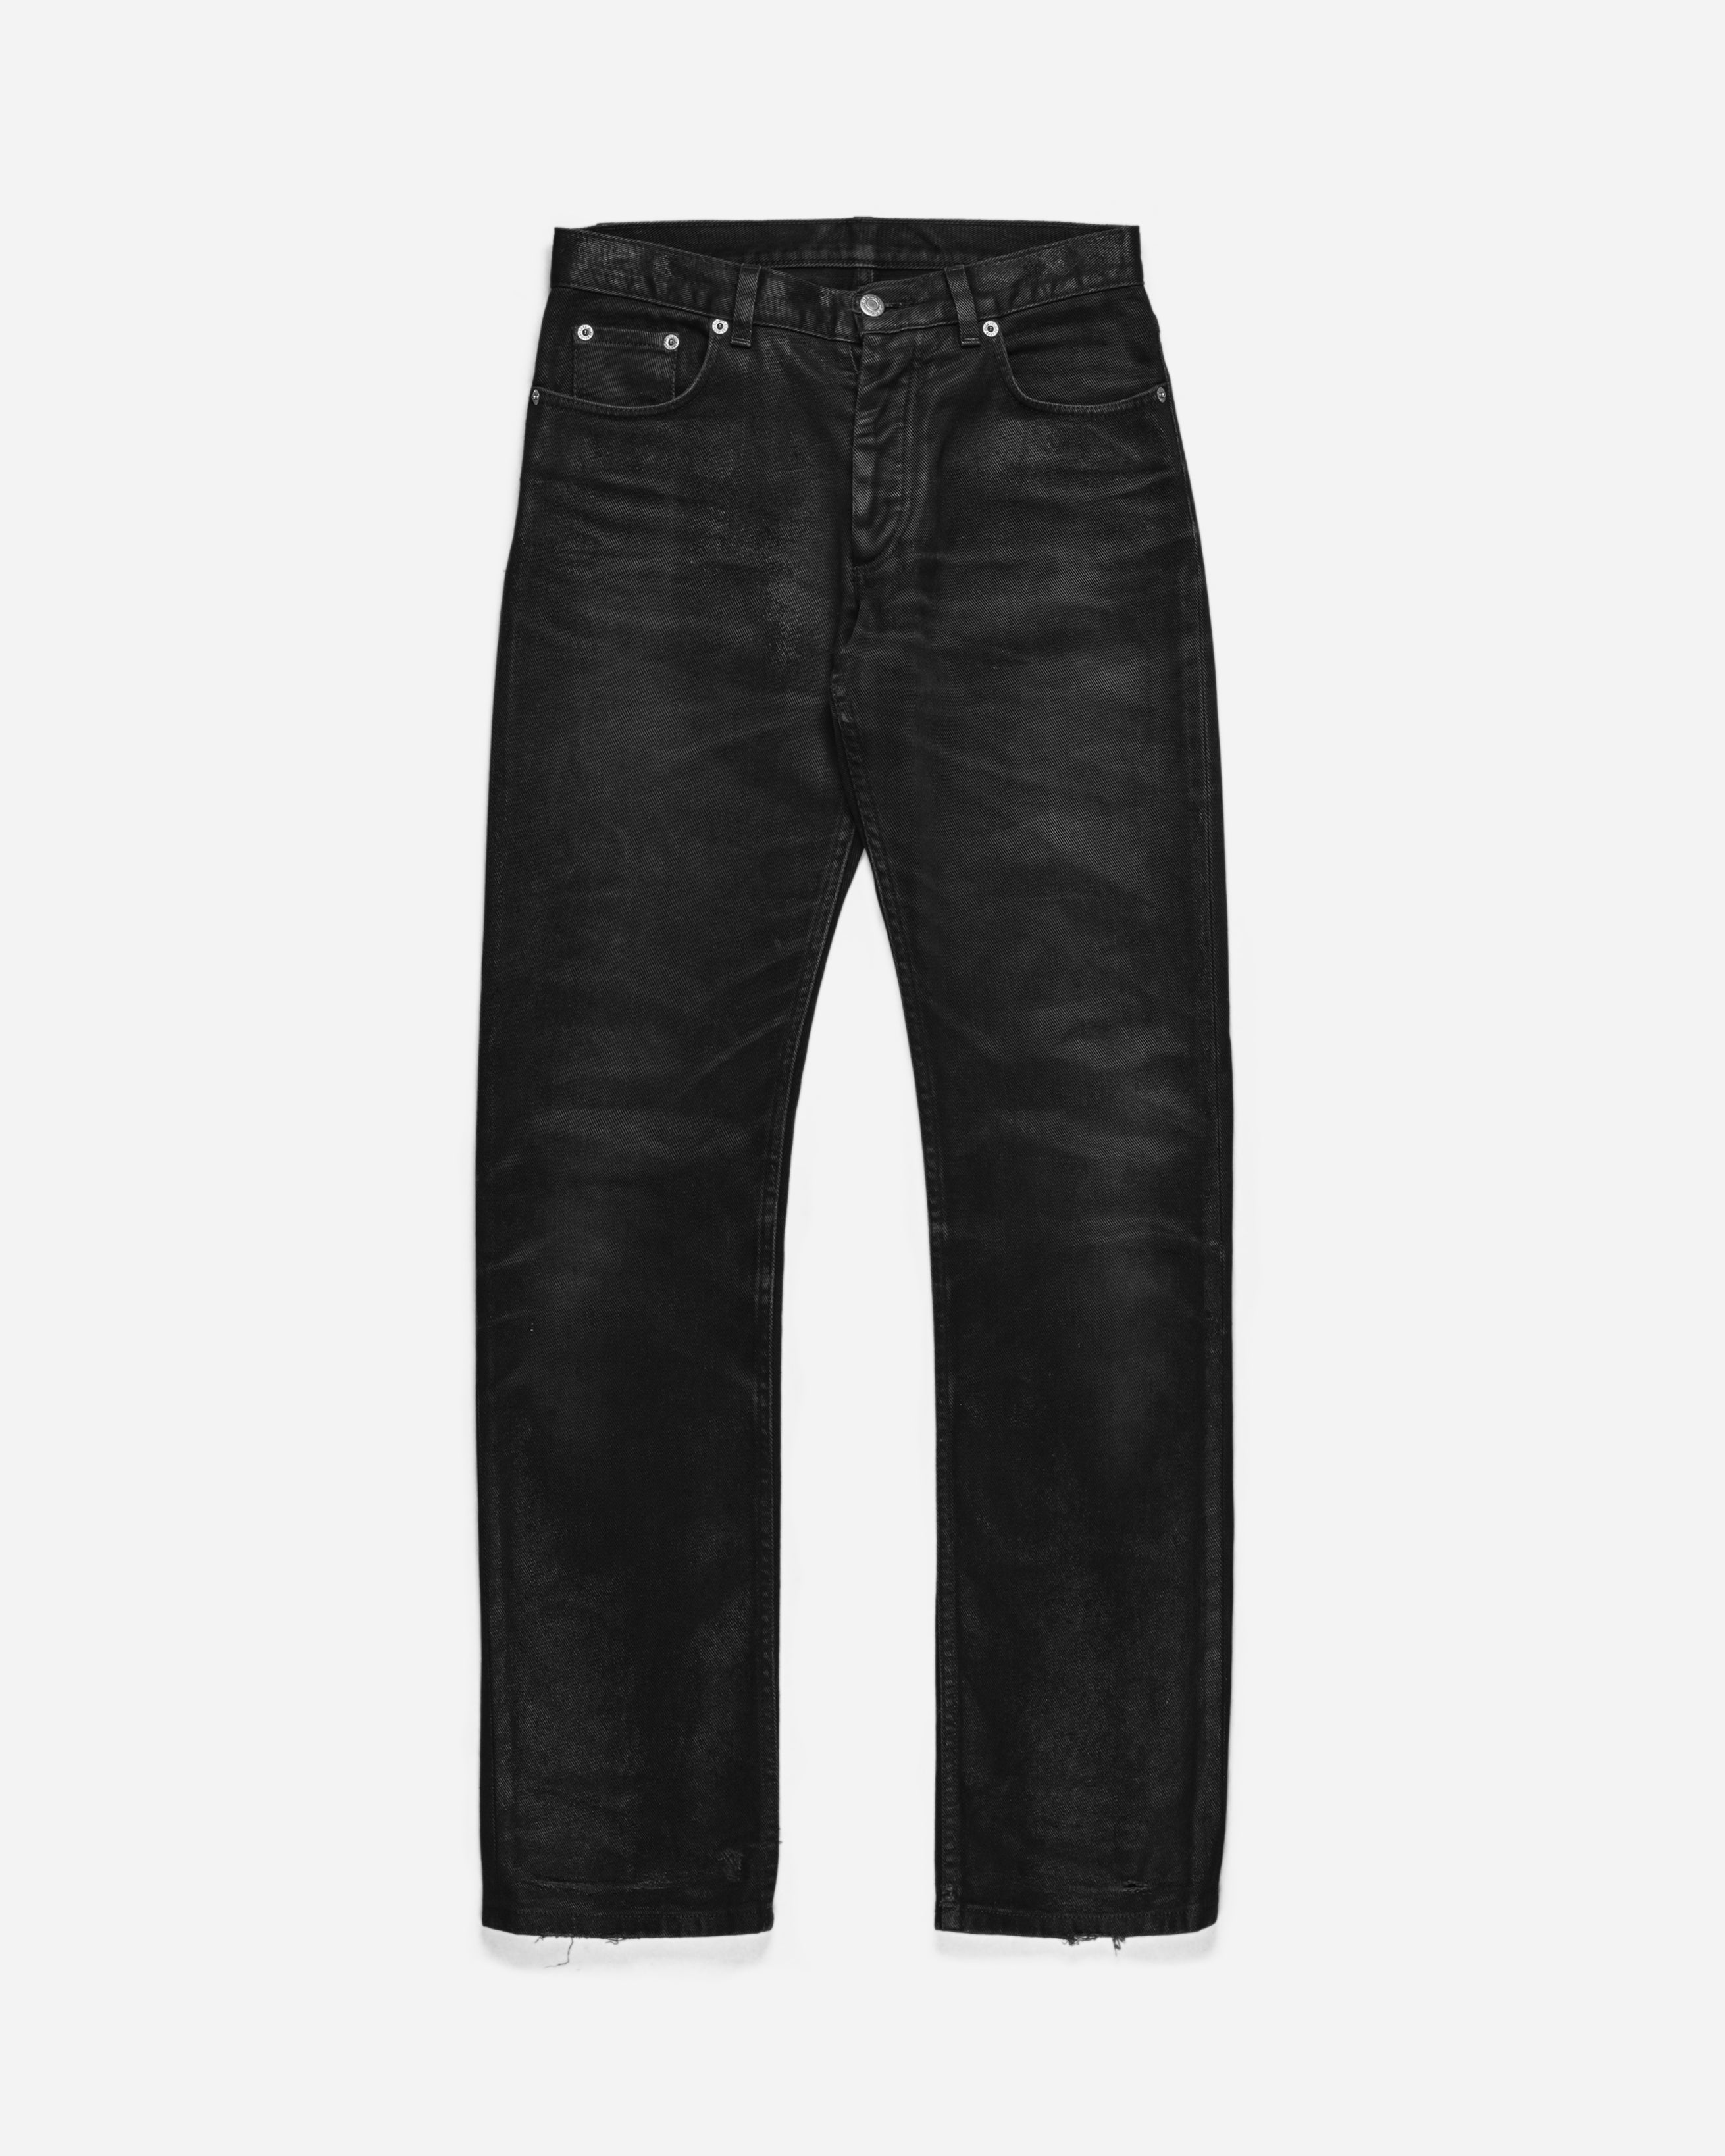 Helmut Lang Black Coated Jeans - AW99 - SILVER LEAGUE